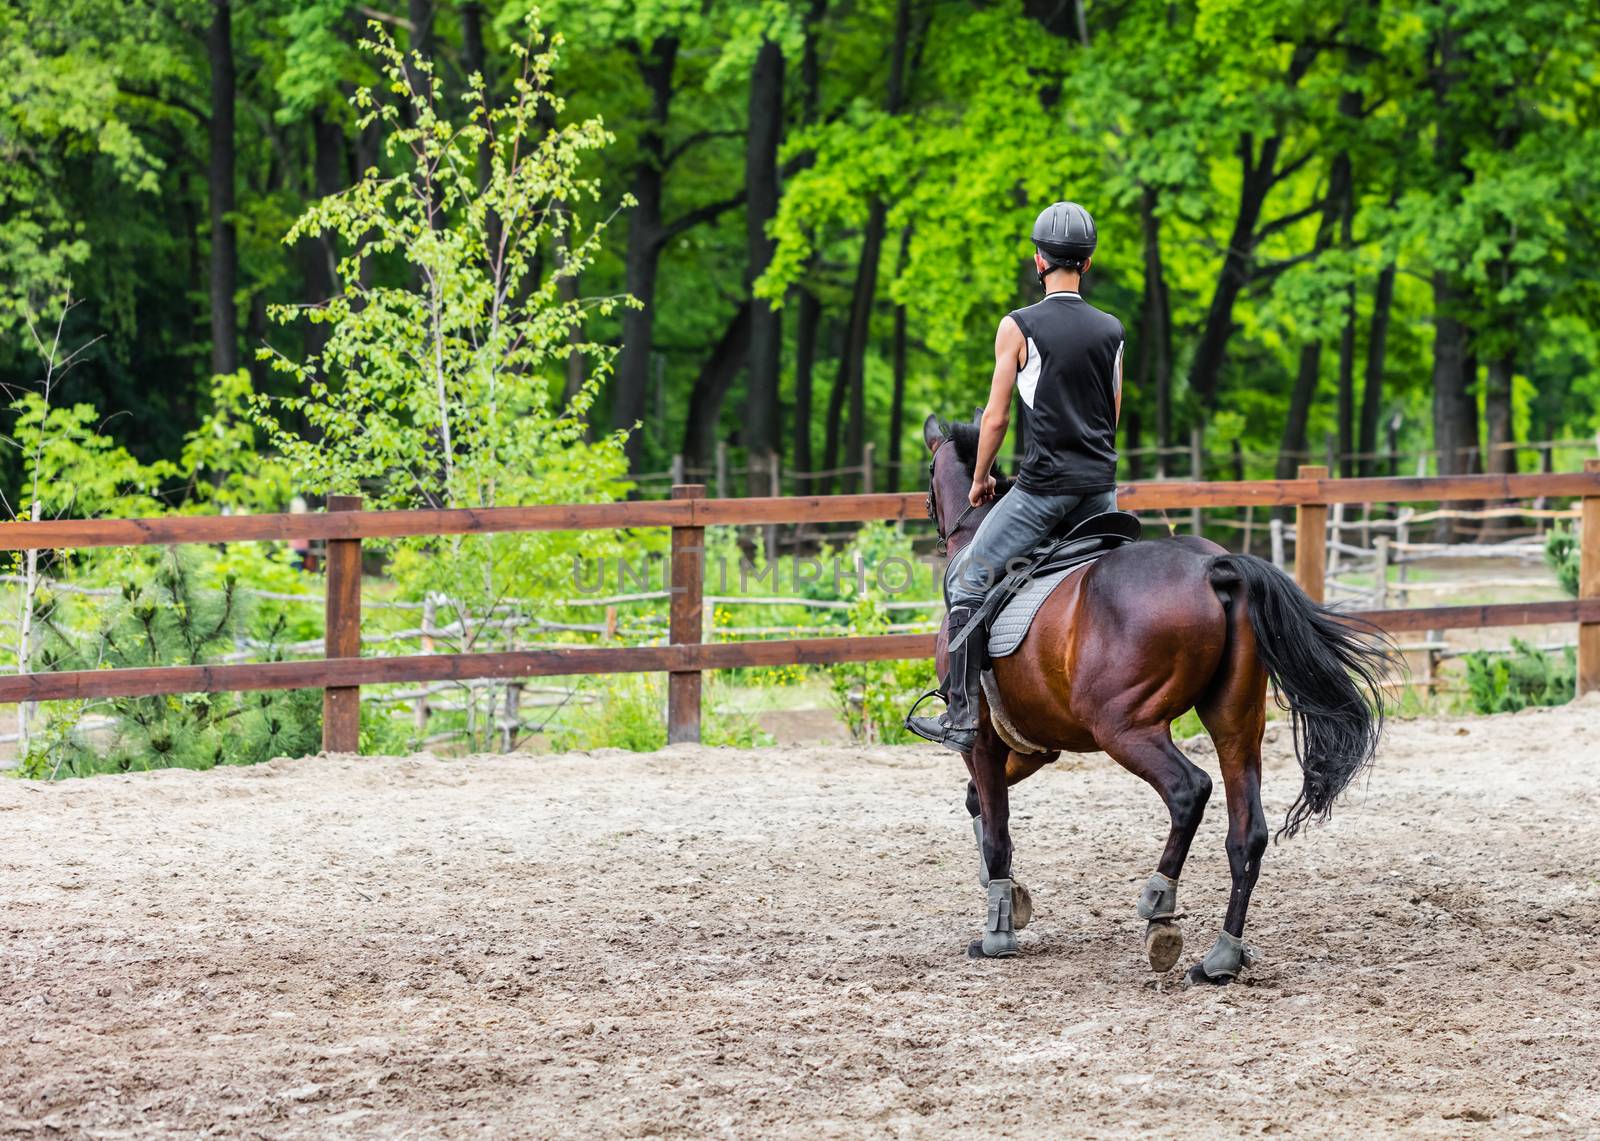 male athlete rides on horse, exercise outdoors